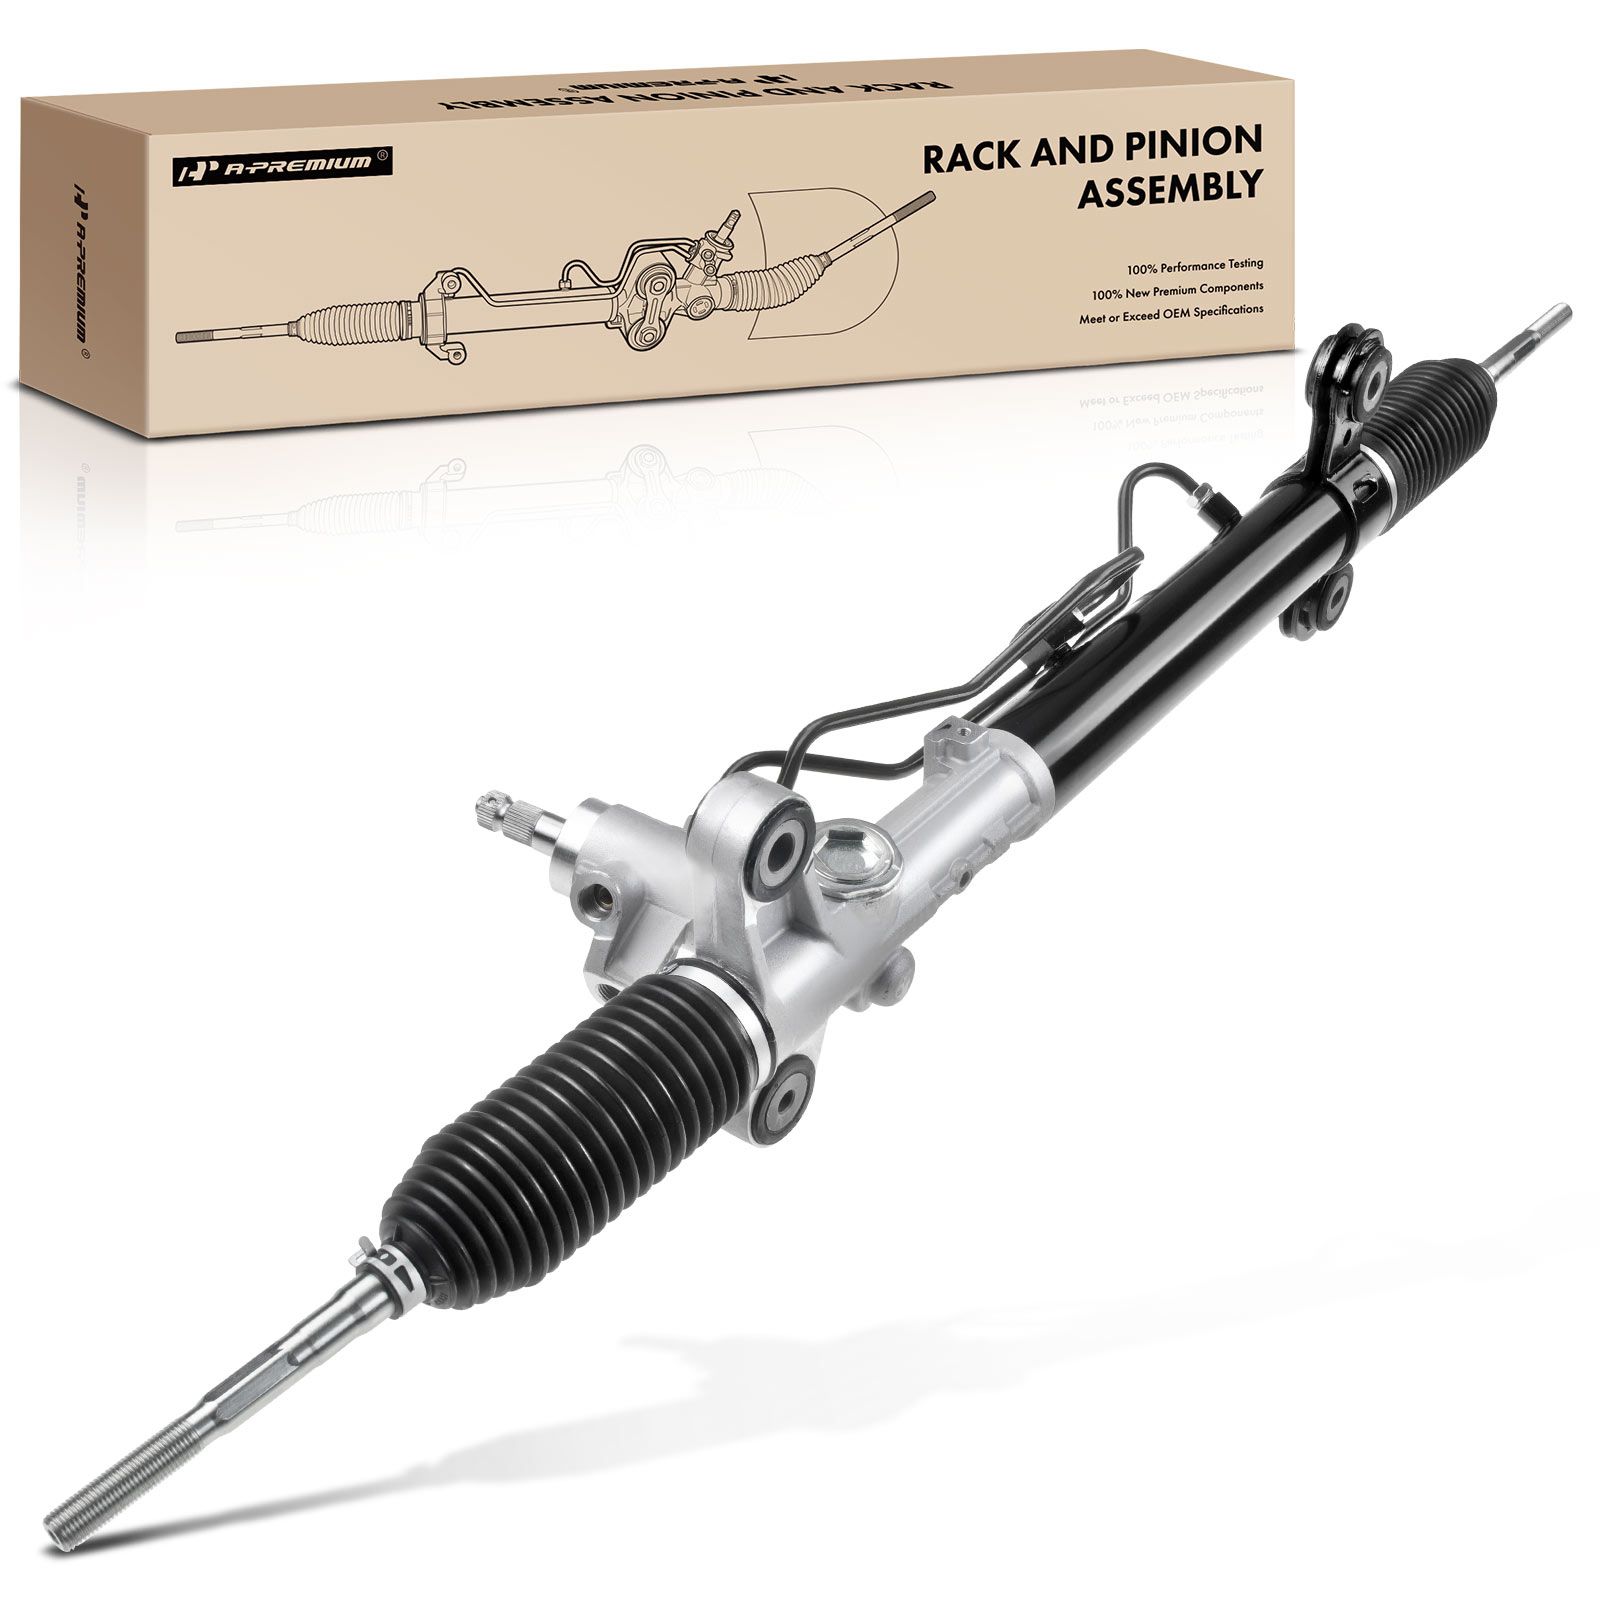 Power Steering Rack & Pinion Assembly for Honda CR-V 2007-2011 with Hydraulic Power